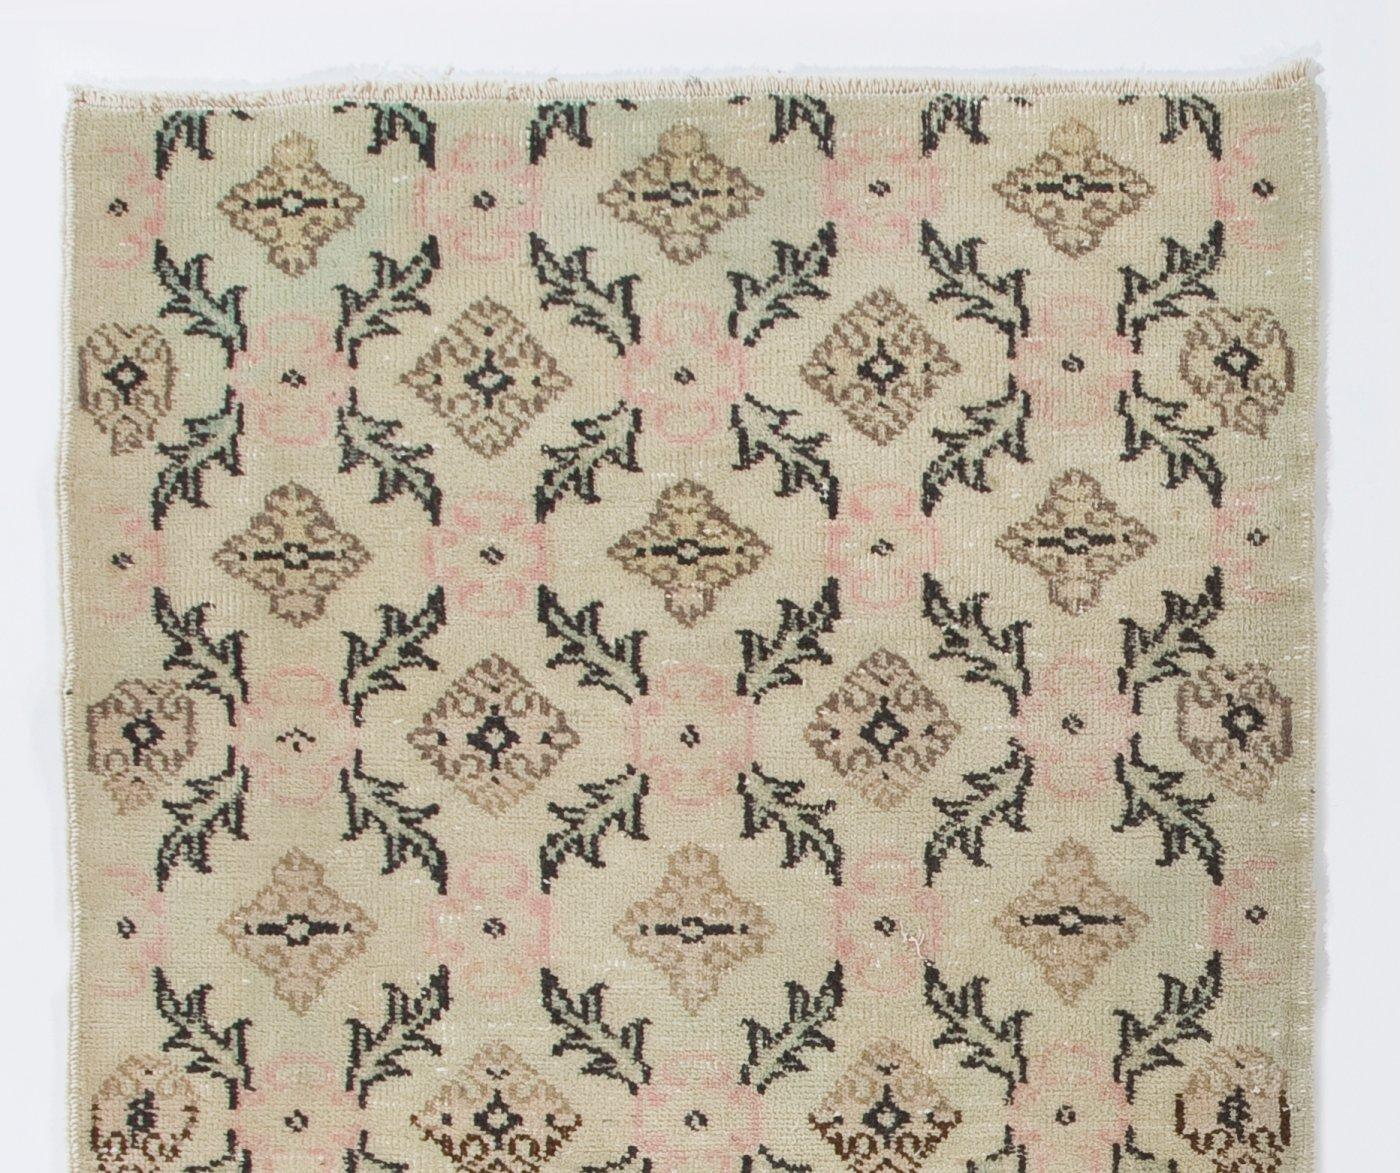 A vintage Turkish accent rug in beige, brown, black, green and pink colors. It was hand-knotted in the 1960s and floral design. Low wool pile on finely woven cotton foundation. Sturdy and can be used on a high traffic area, suitable for both